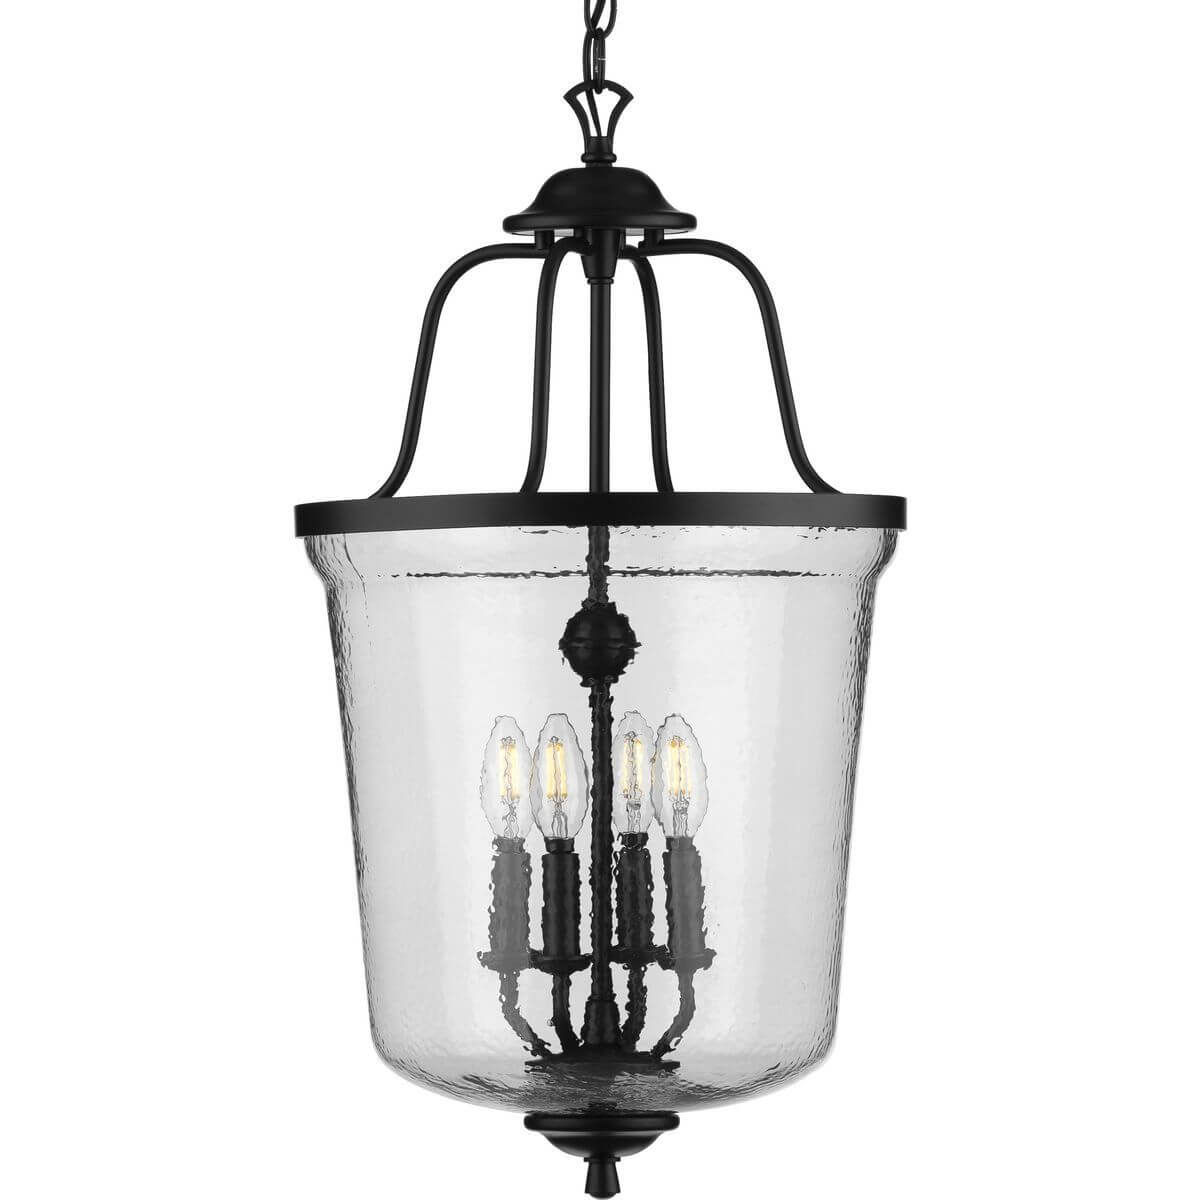 Progress Lighting Bowman 4 Light 14 inch Foyer Pendant in Matte Black with Clear Chiseled Glass Shade P500207-031